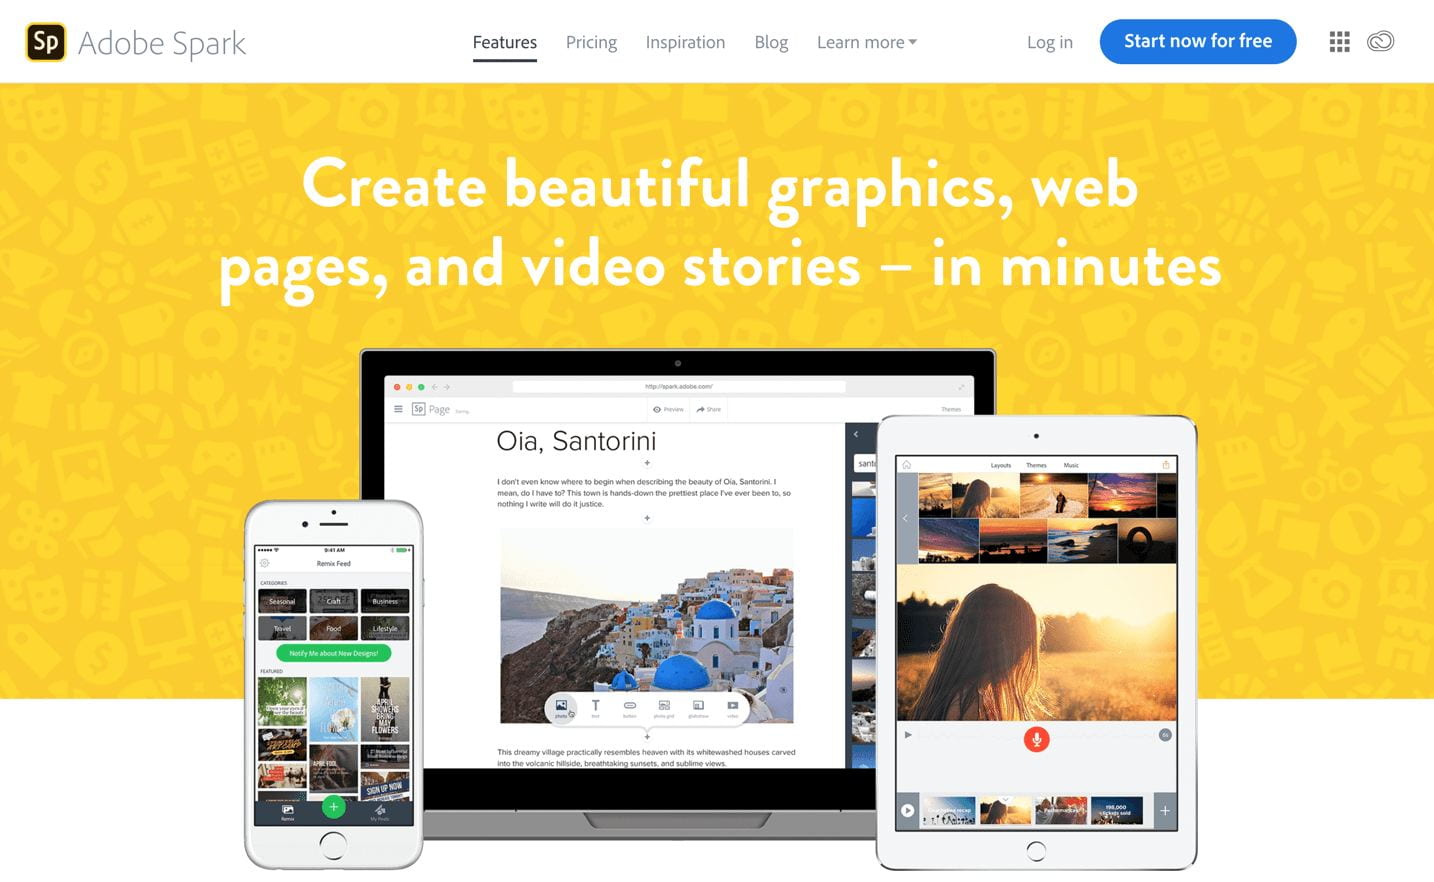 Create beautiful graphics, web pages ad video stories in minutes